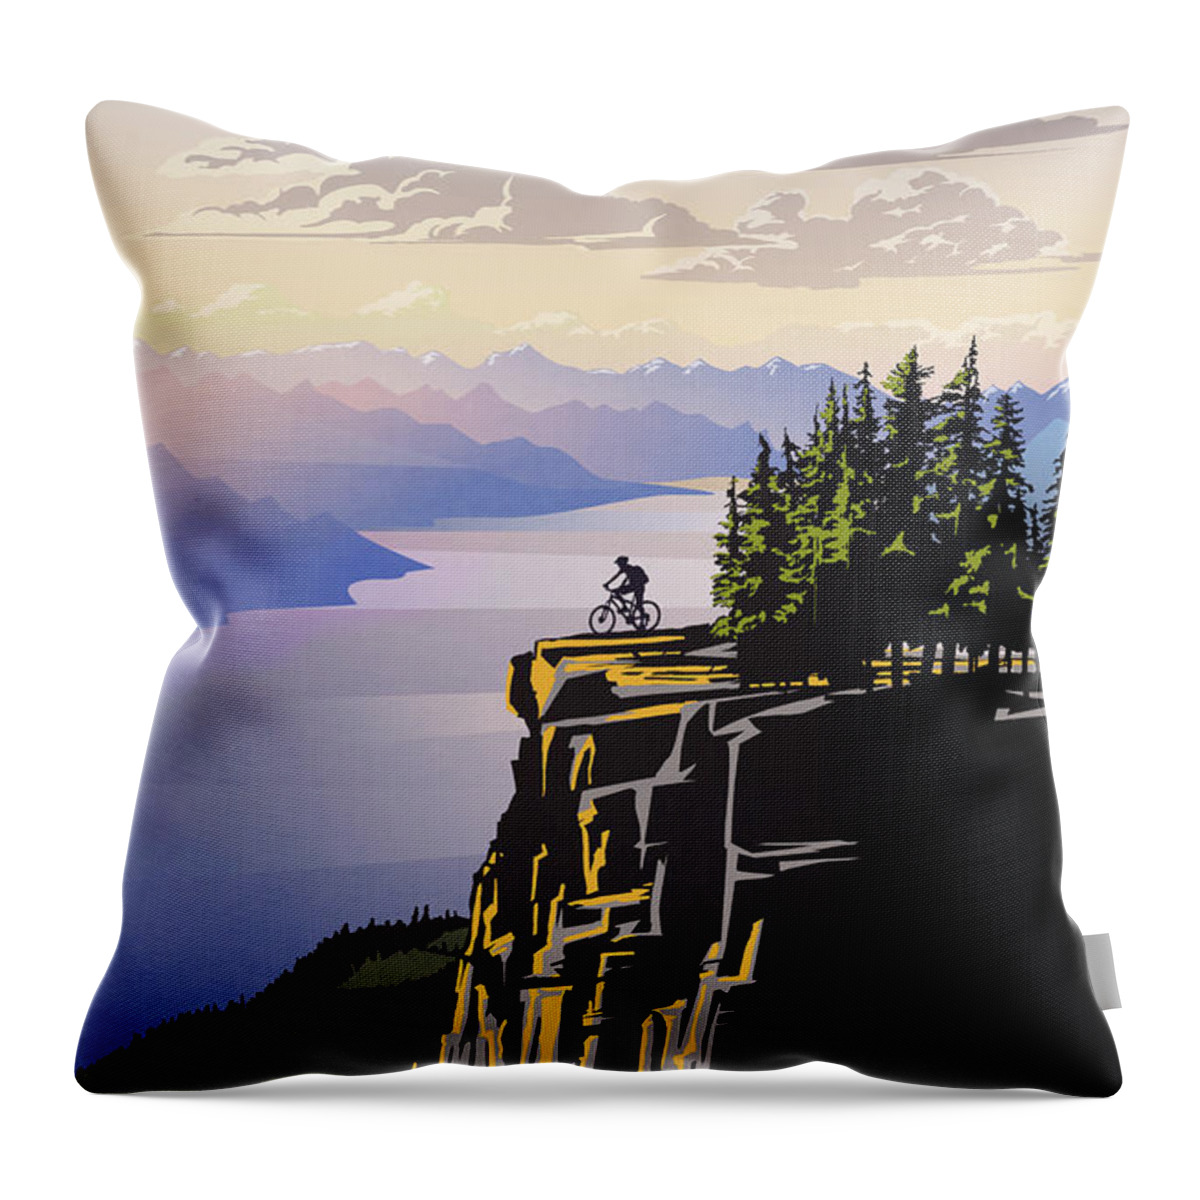 Cycling Art Throw Pillow featuring the painting Arrow Lake Solo by Sassan Filsoof